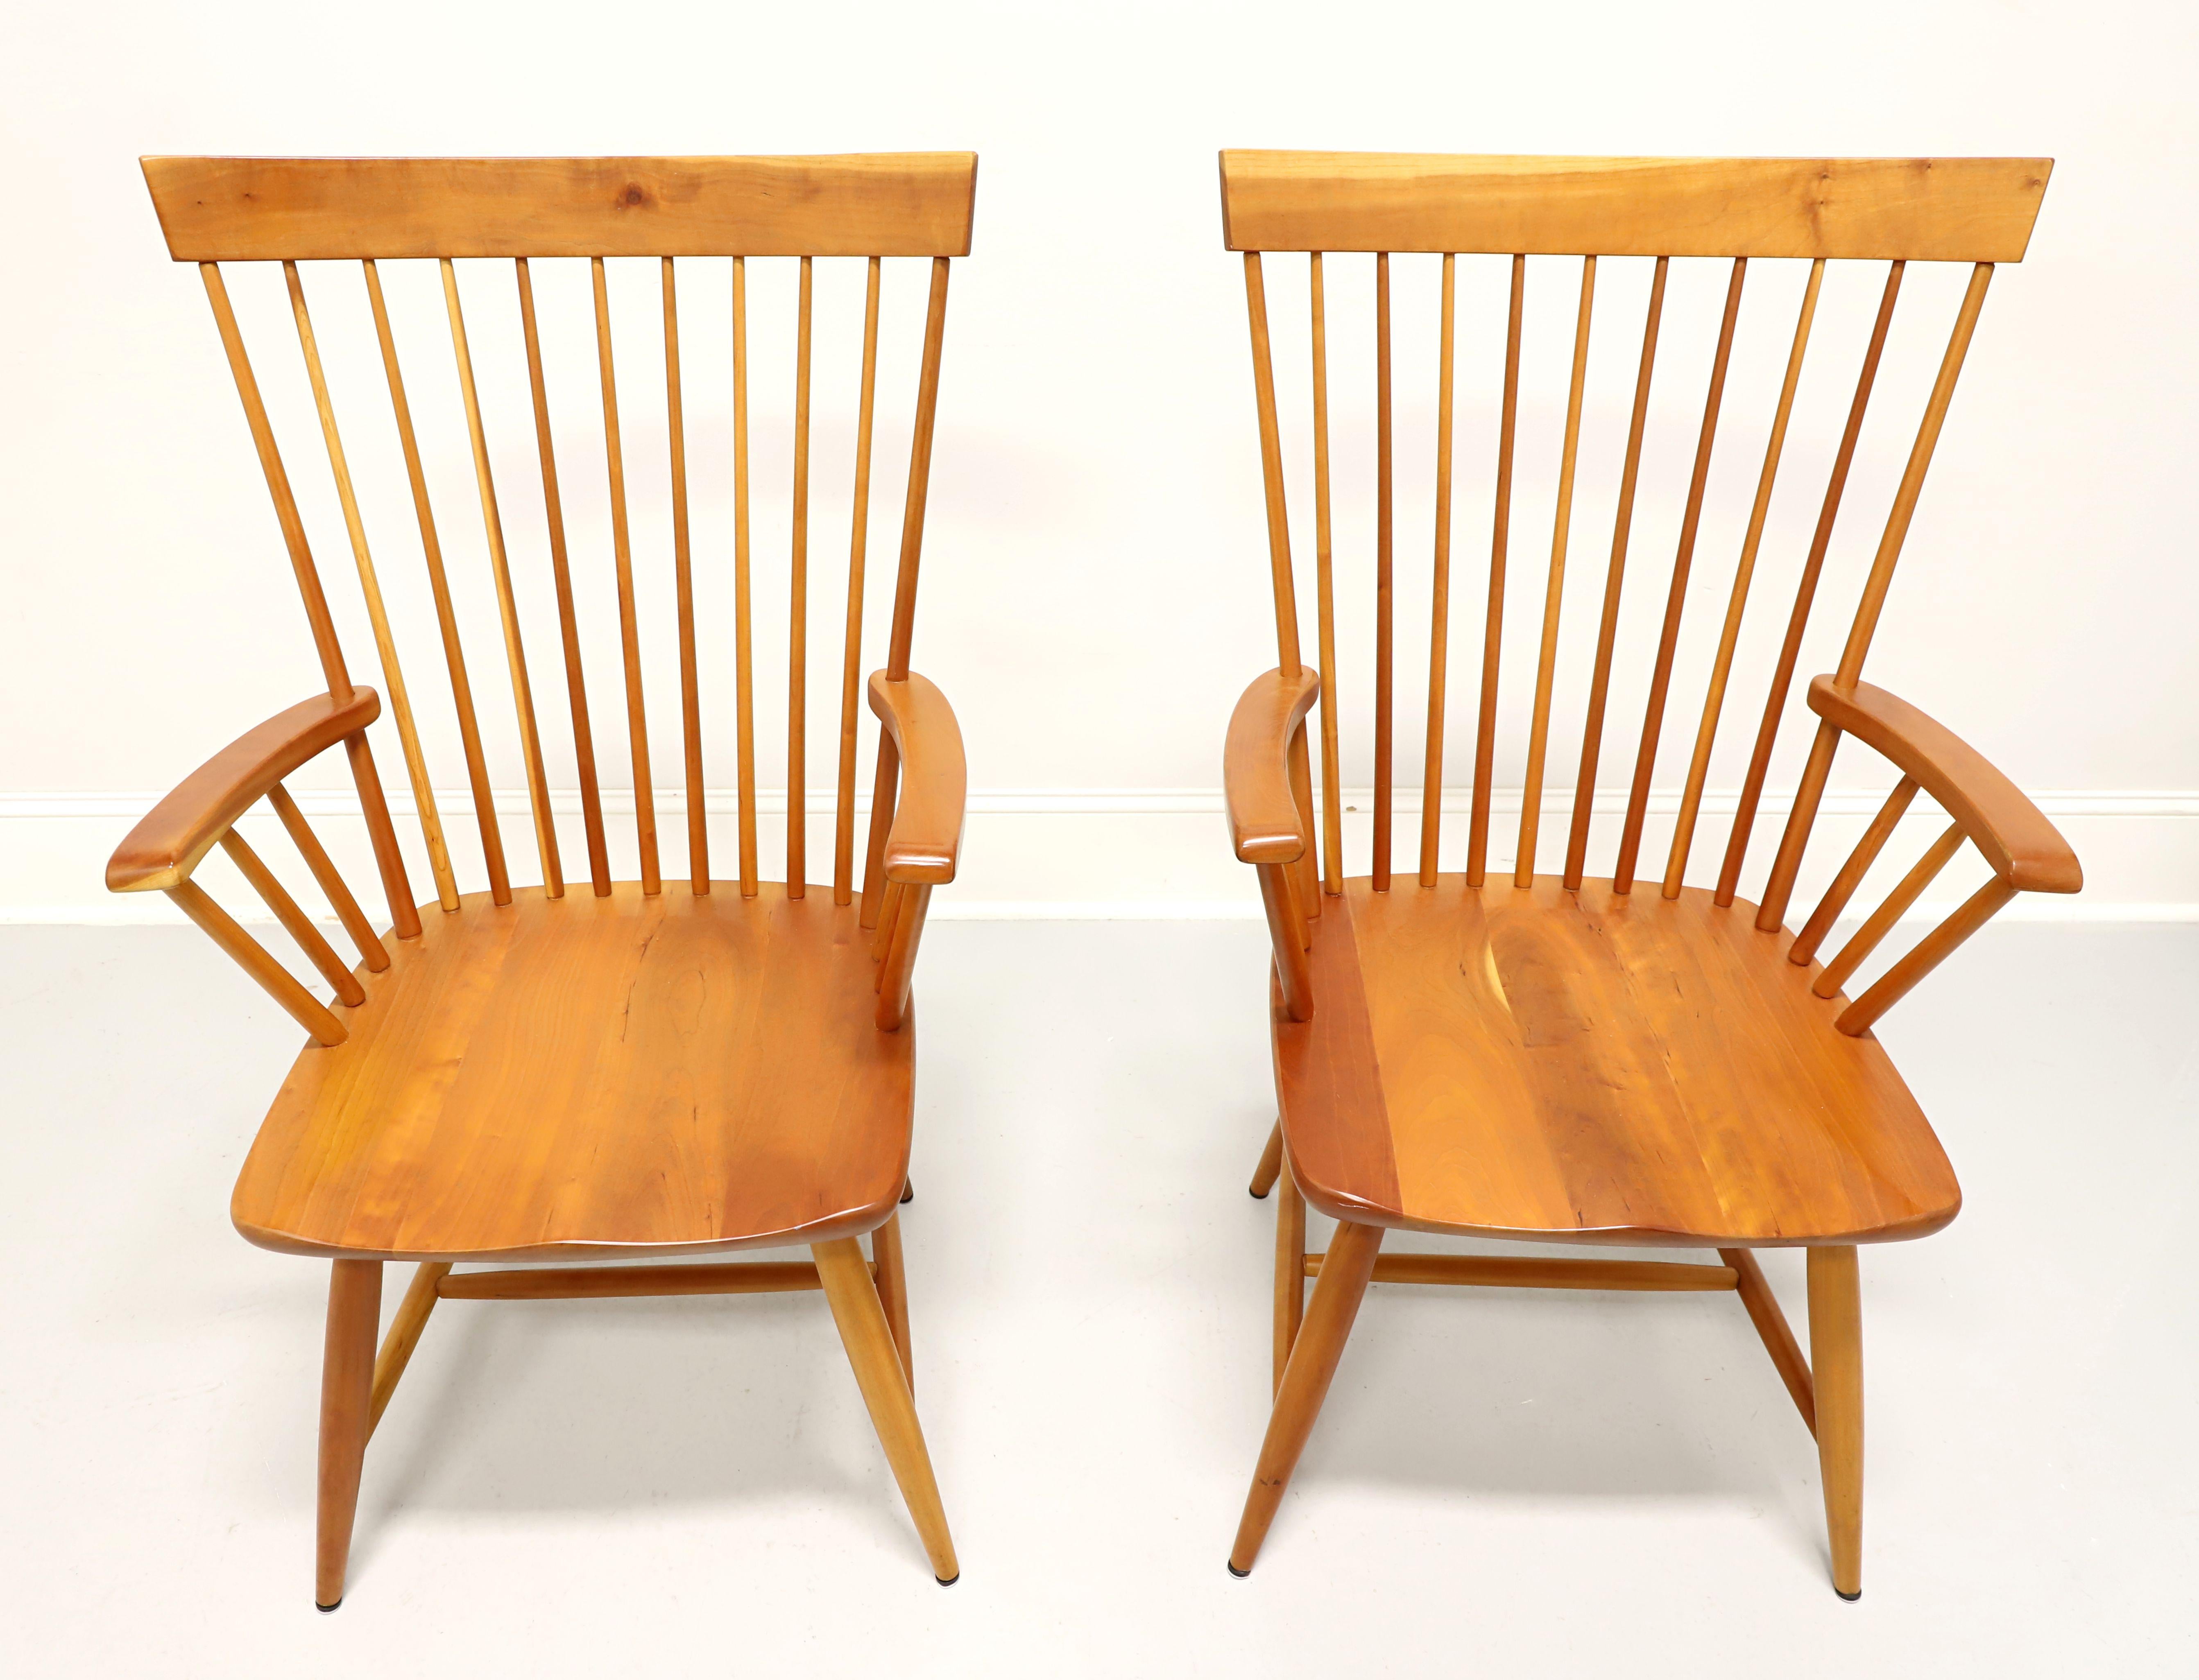 A pair of Early American Windsor style dining armchairs by Pompanoosuc Mills, their Mason. Solid cherry wood with rectangular crestrail, tapered spindles backrest, gently curved arms, saddle shape seat, flared tapered legs and stretchers. Made in